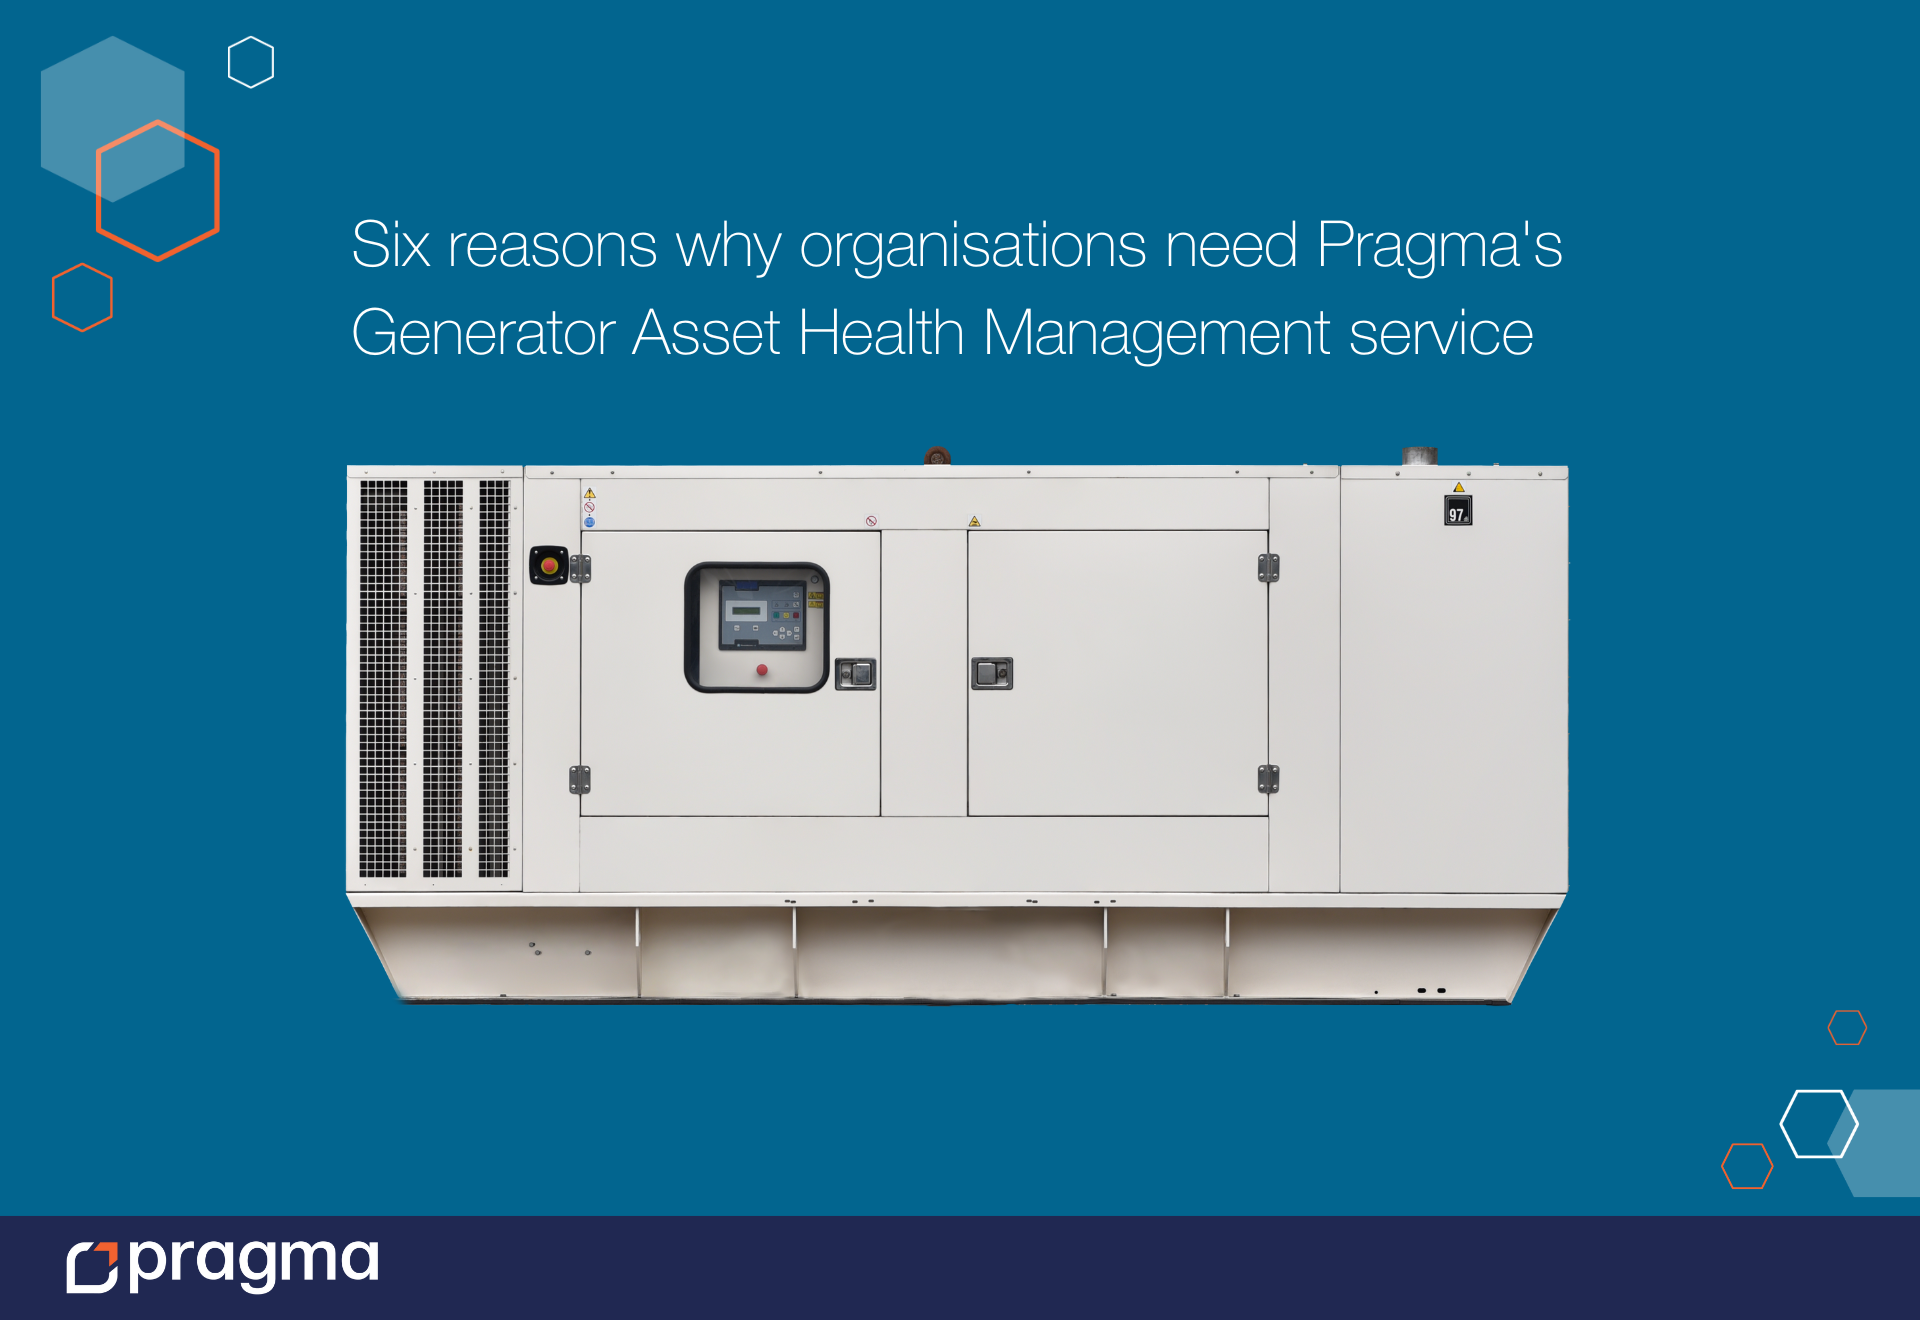 Six reasons why organisations need Pragma's Generator Asset Health Management service with online monitoring and maintenance management